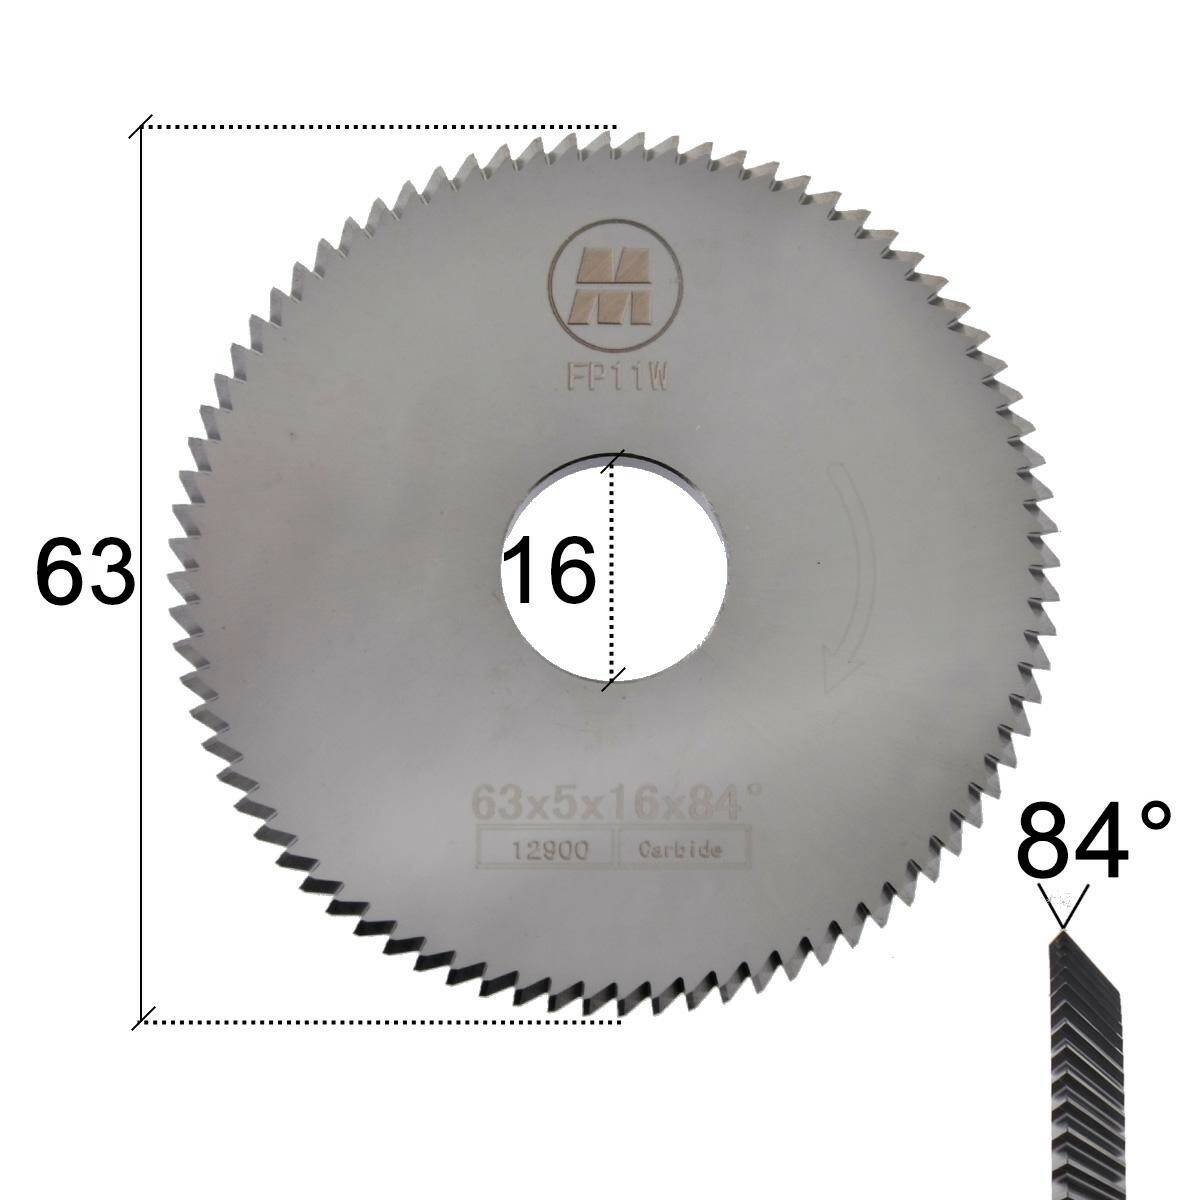 Angle cutter FP11W - high temperature resistant